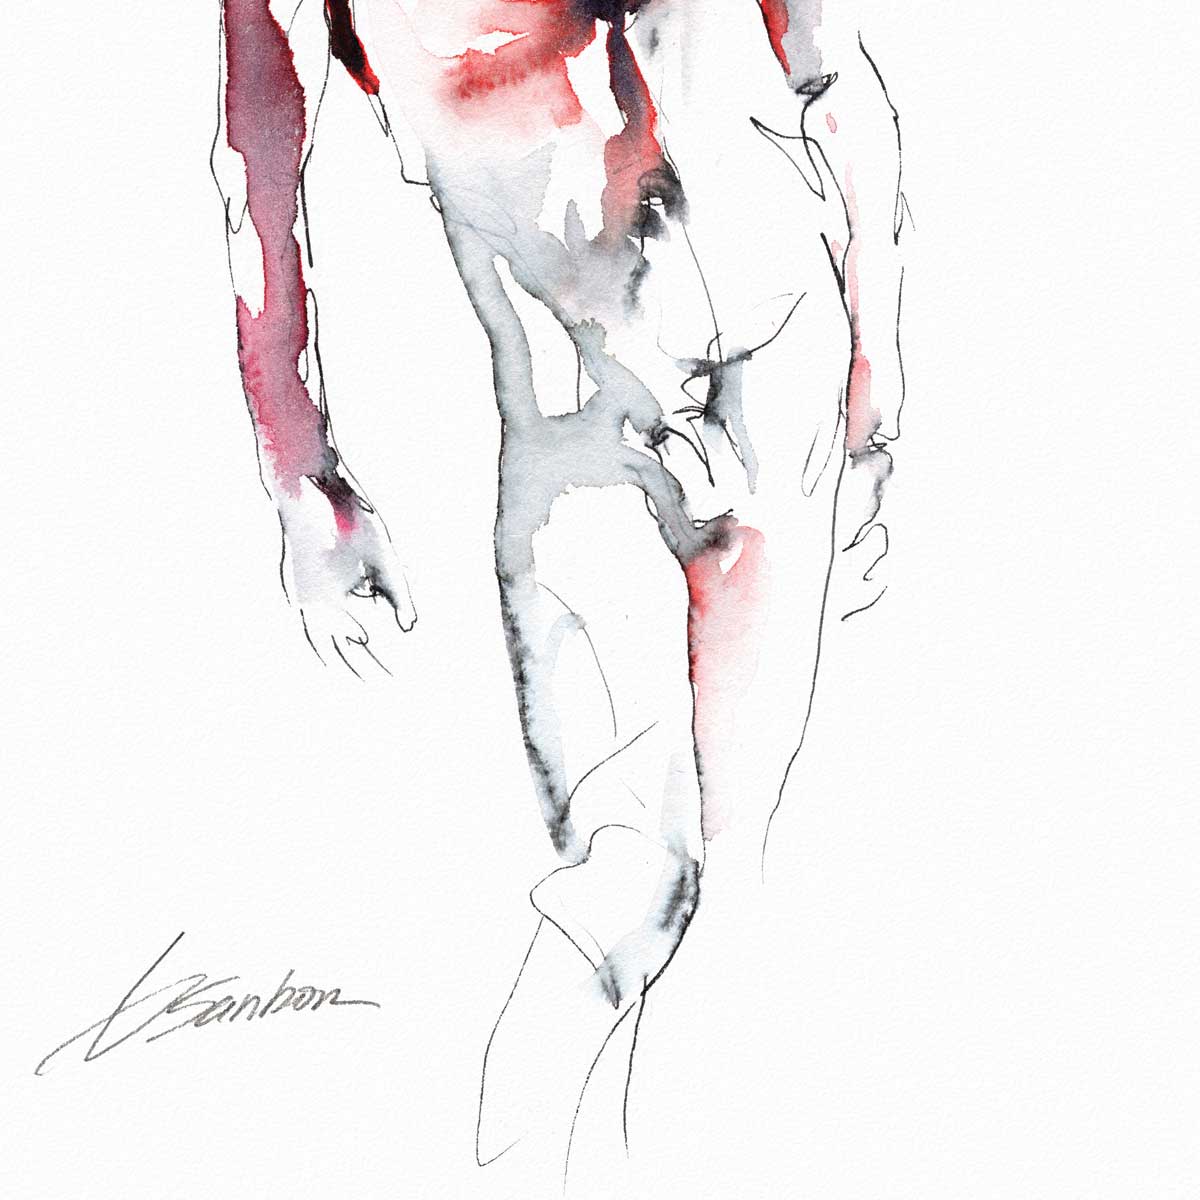 Simple Male Nude Painting - Ink and Watercolor - Giclee Art Print